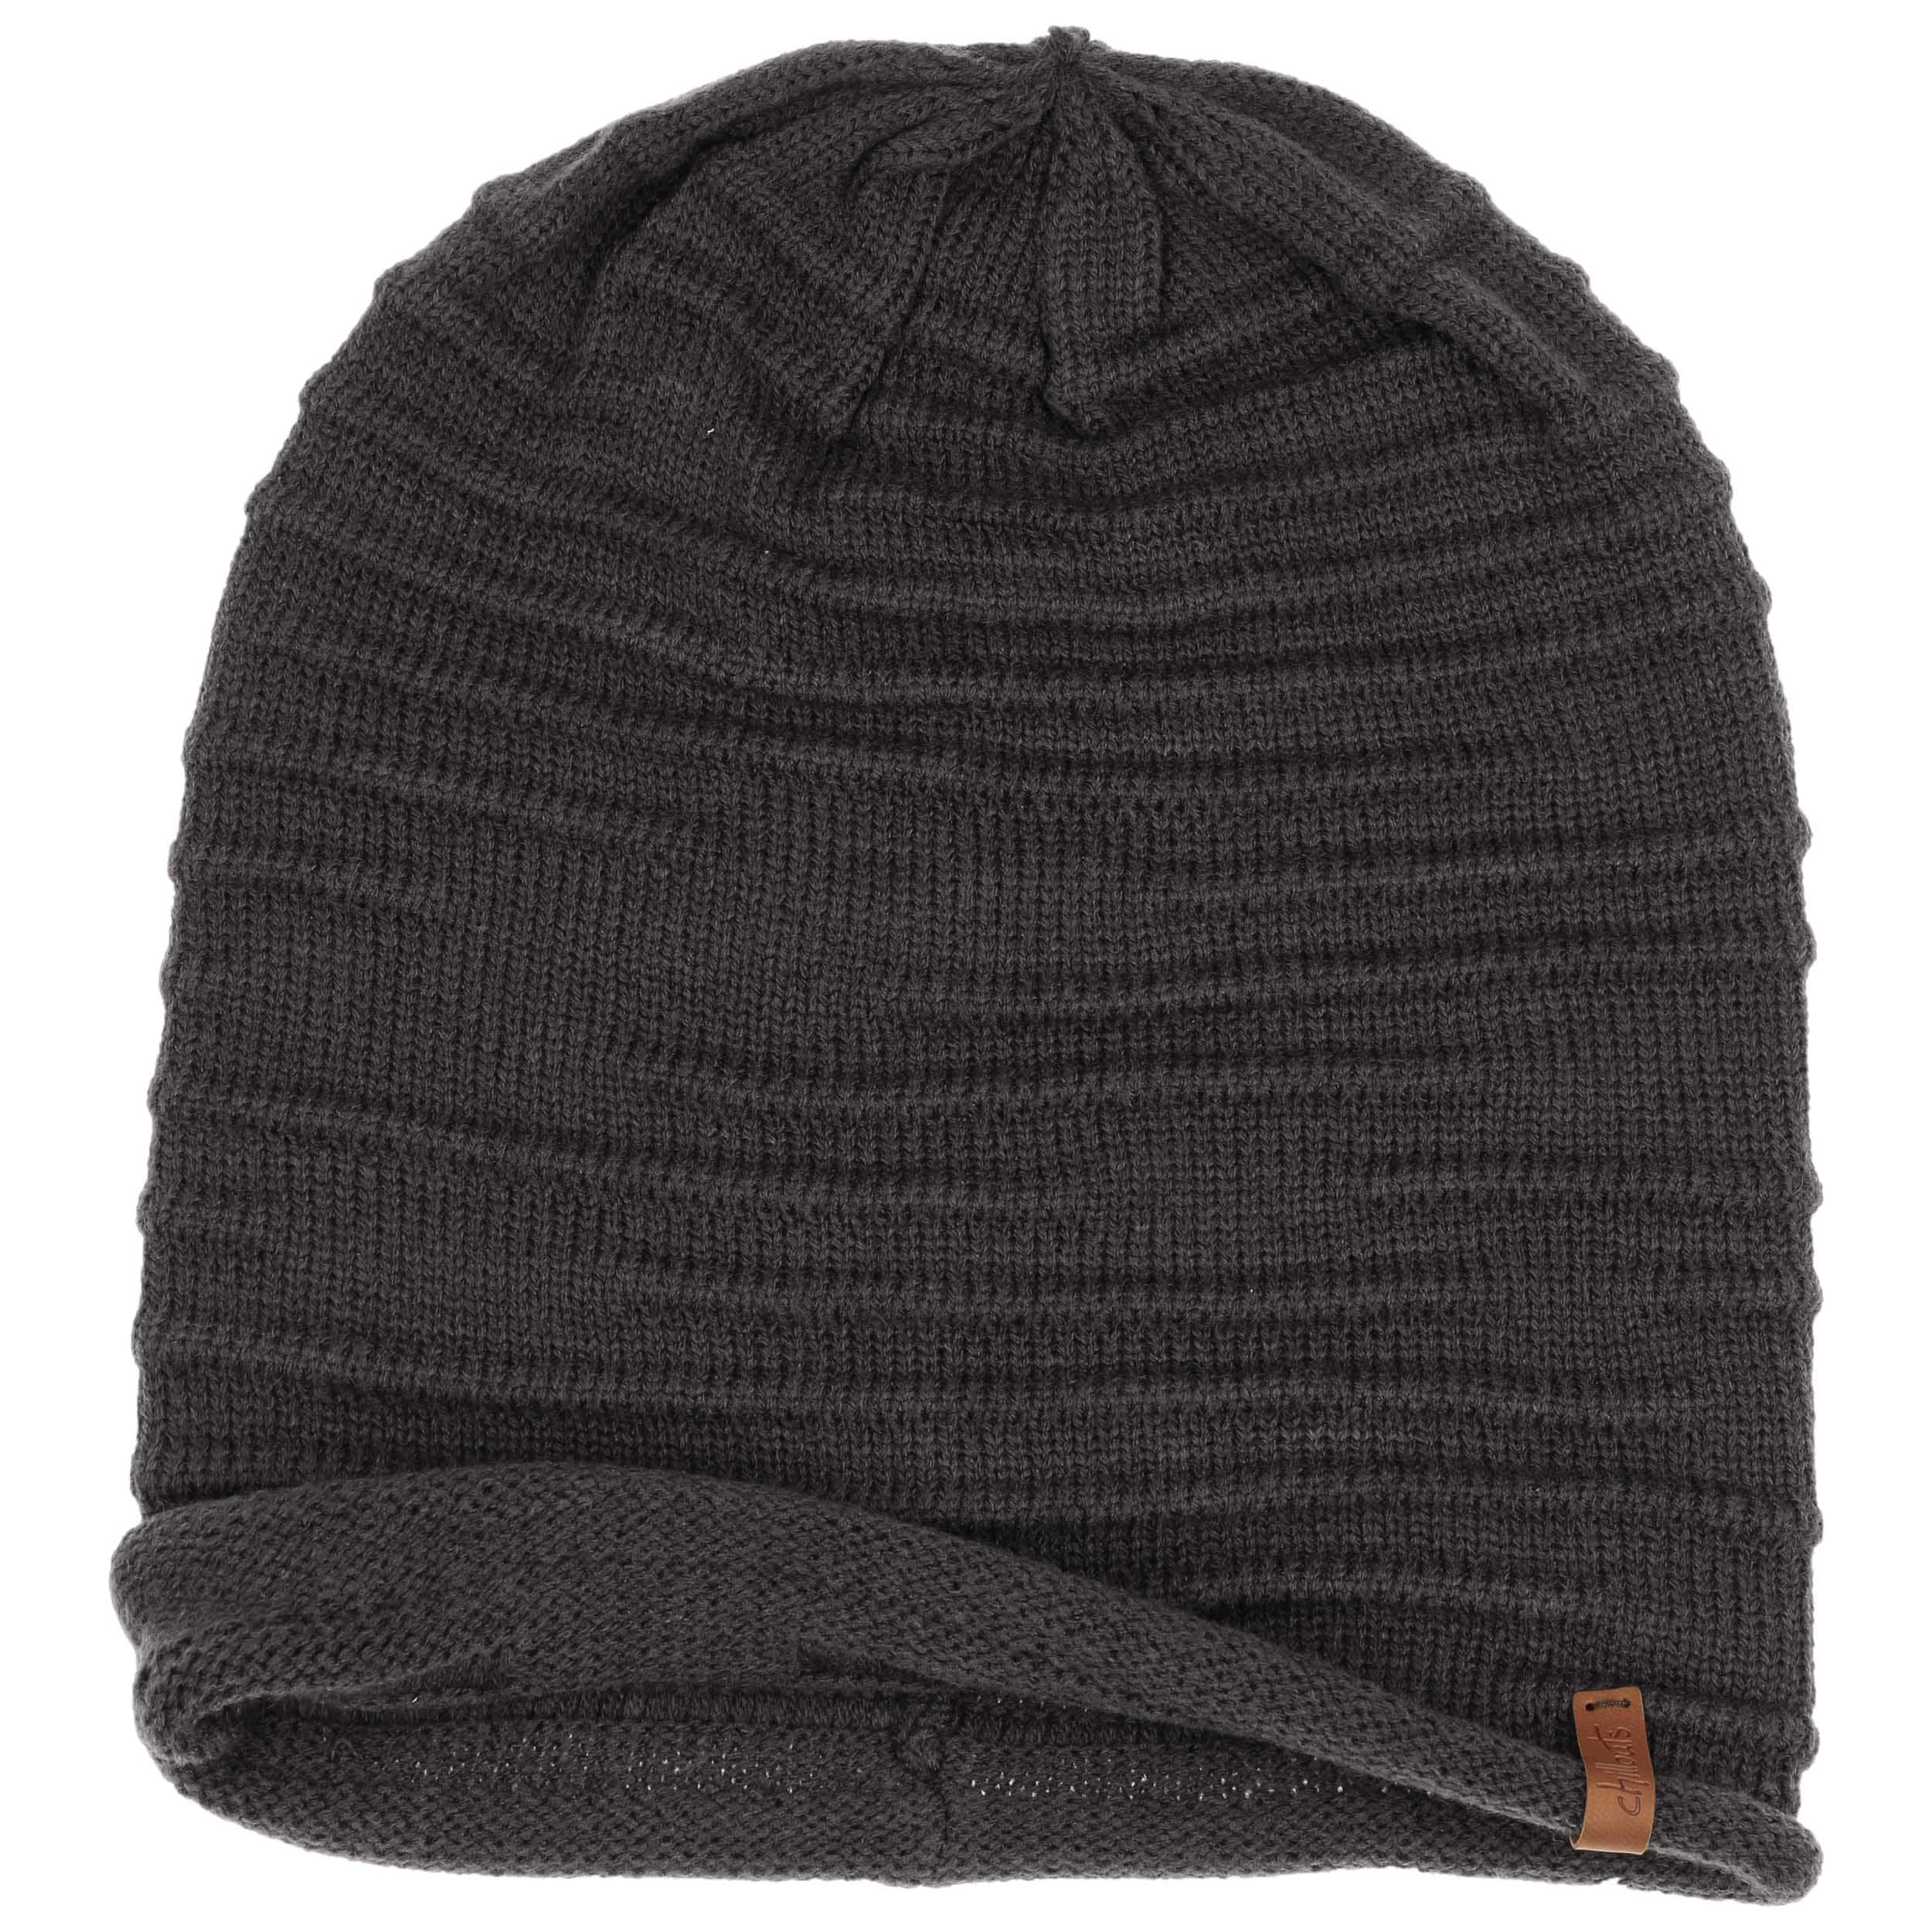 19,95 - Chillouts Beanie Strickmütze Long Aarony by €